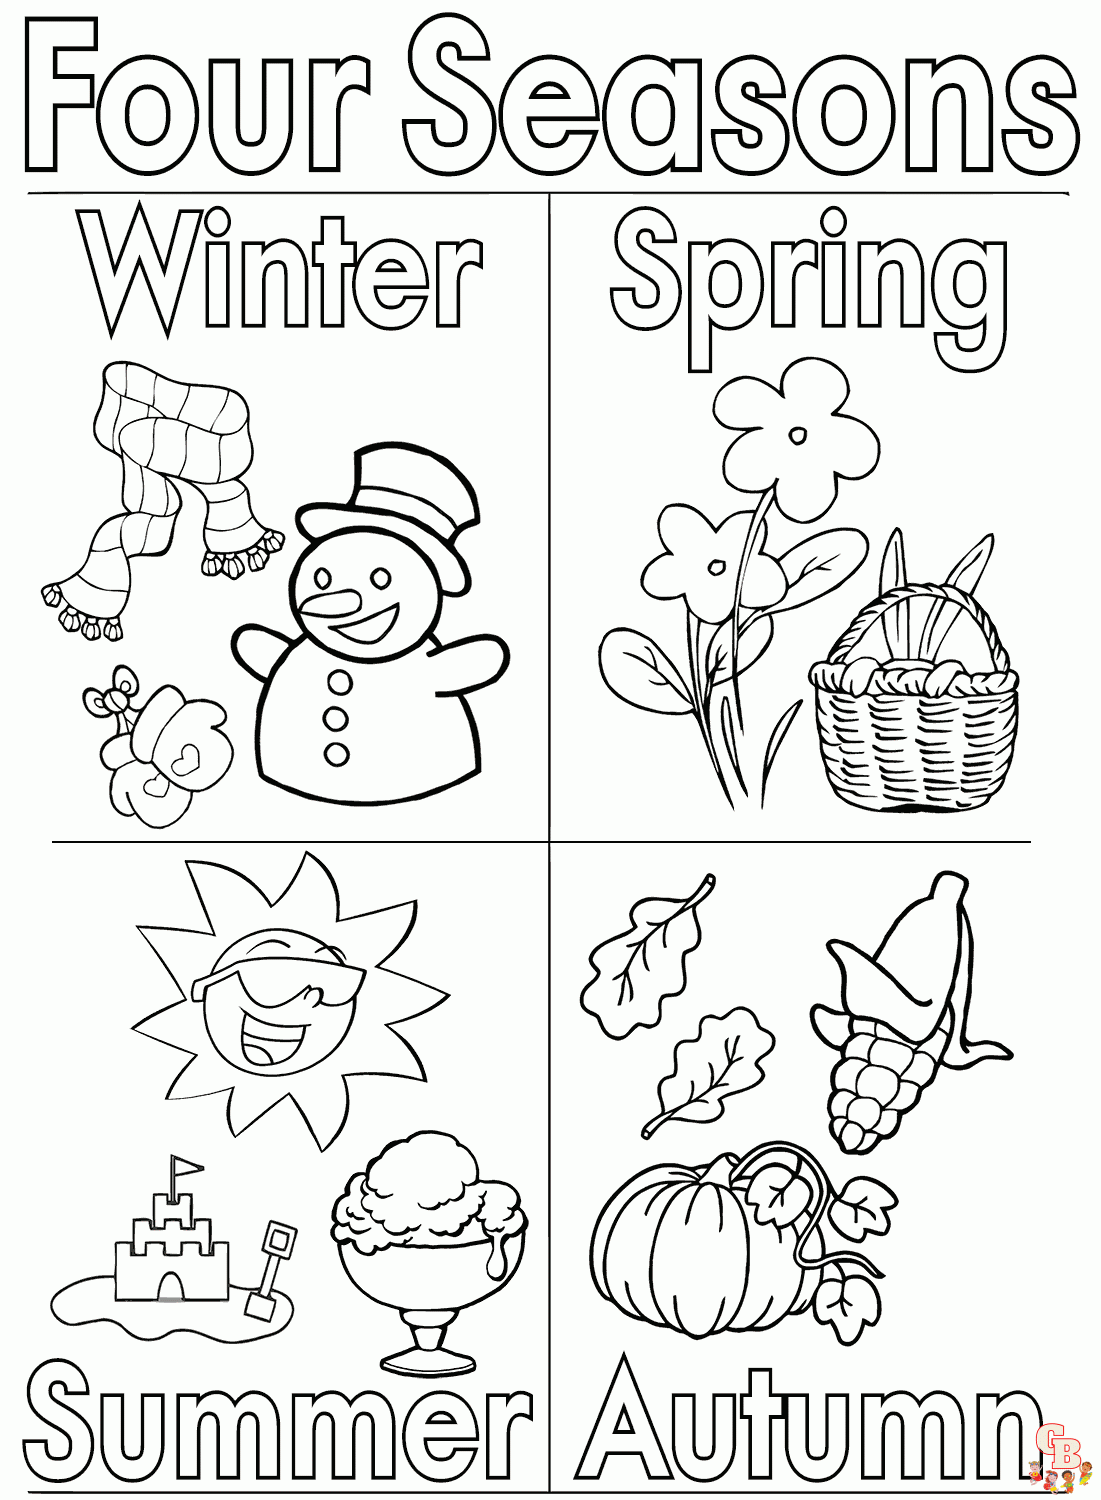 seasons-coloring-pages-children